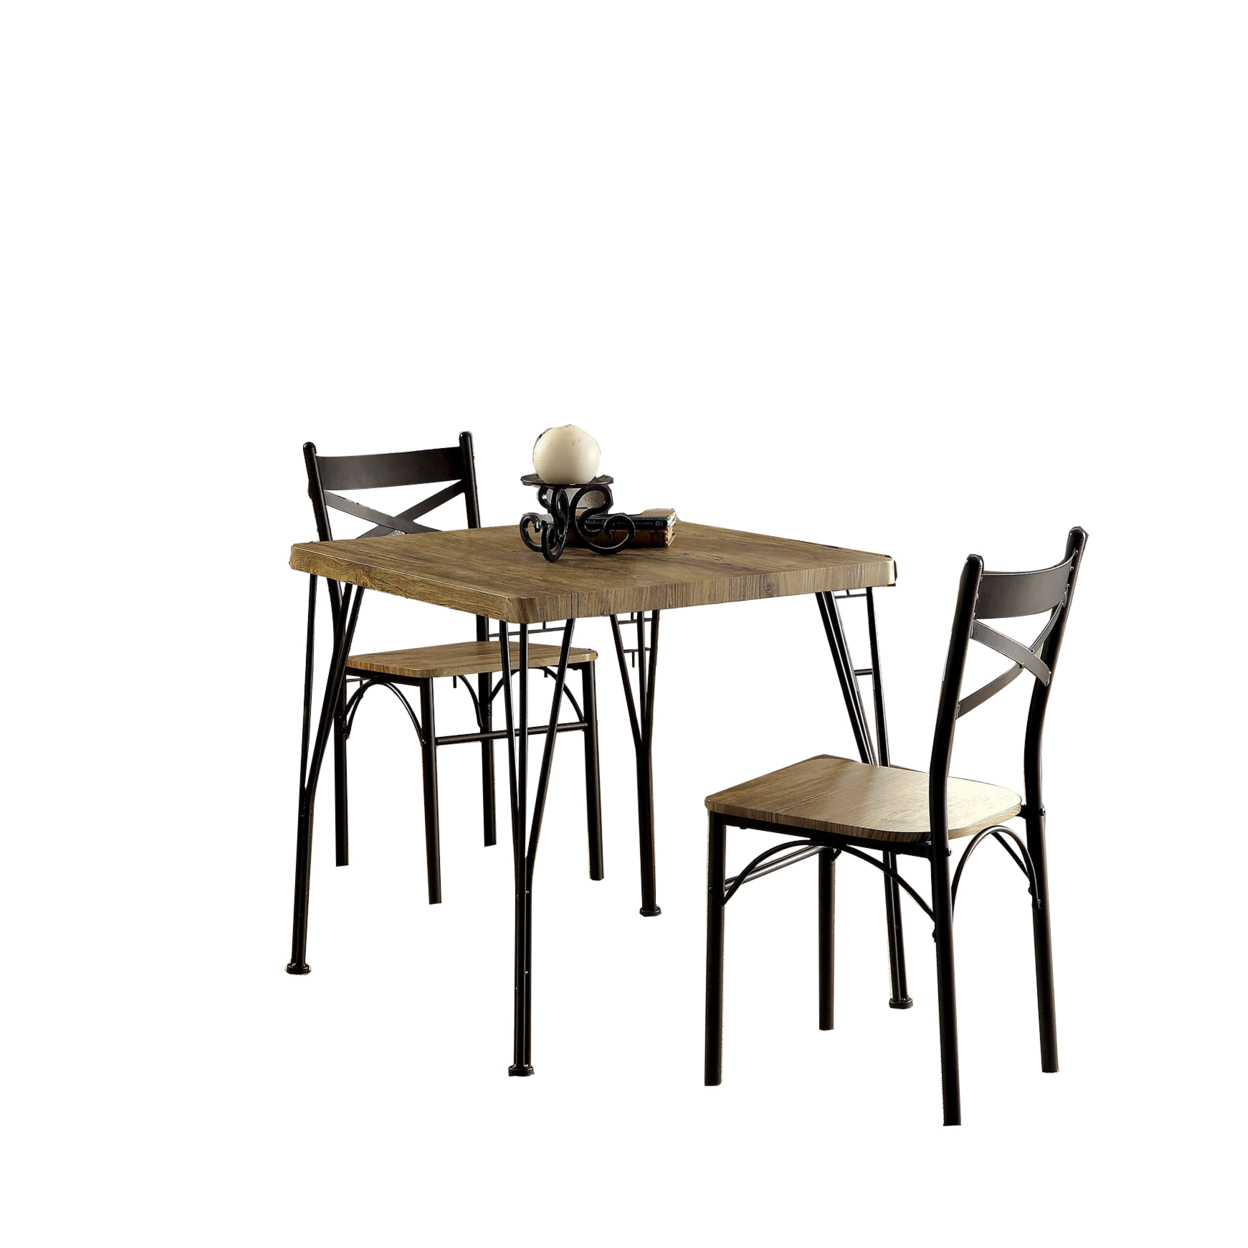 Industrial Style 3 Piece Dining Table Wood And Metal, Brown And Black- Saltoro Sherpi